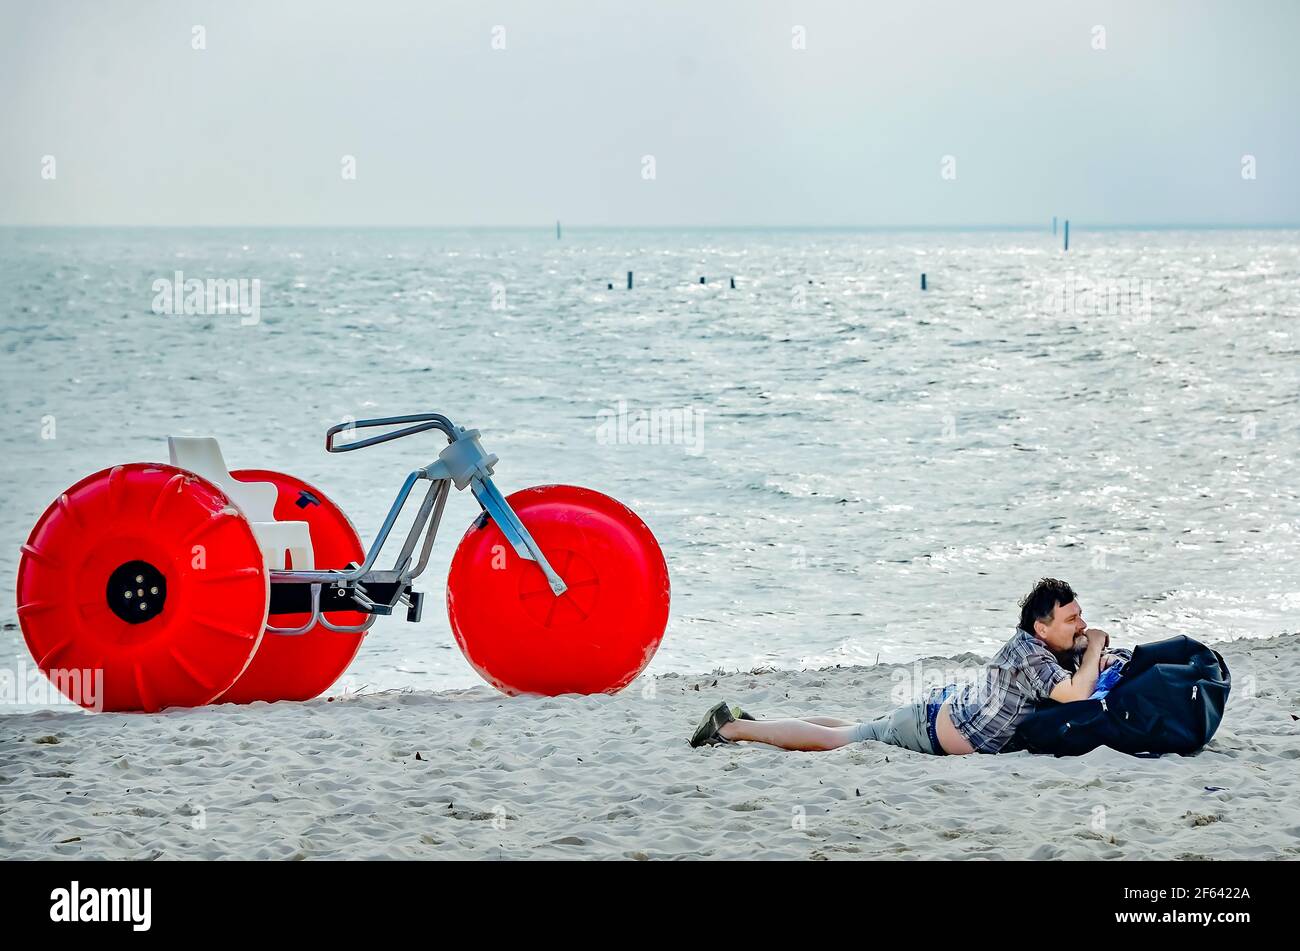 A man lays in the sand beside a beach buggy and watches people on Biloxi Beach, March 27, 2021, in Biloxi, Mississippi. Stock Photo